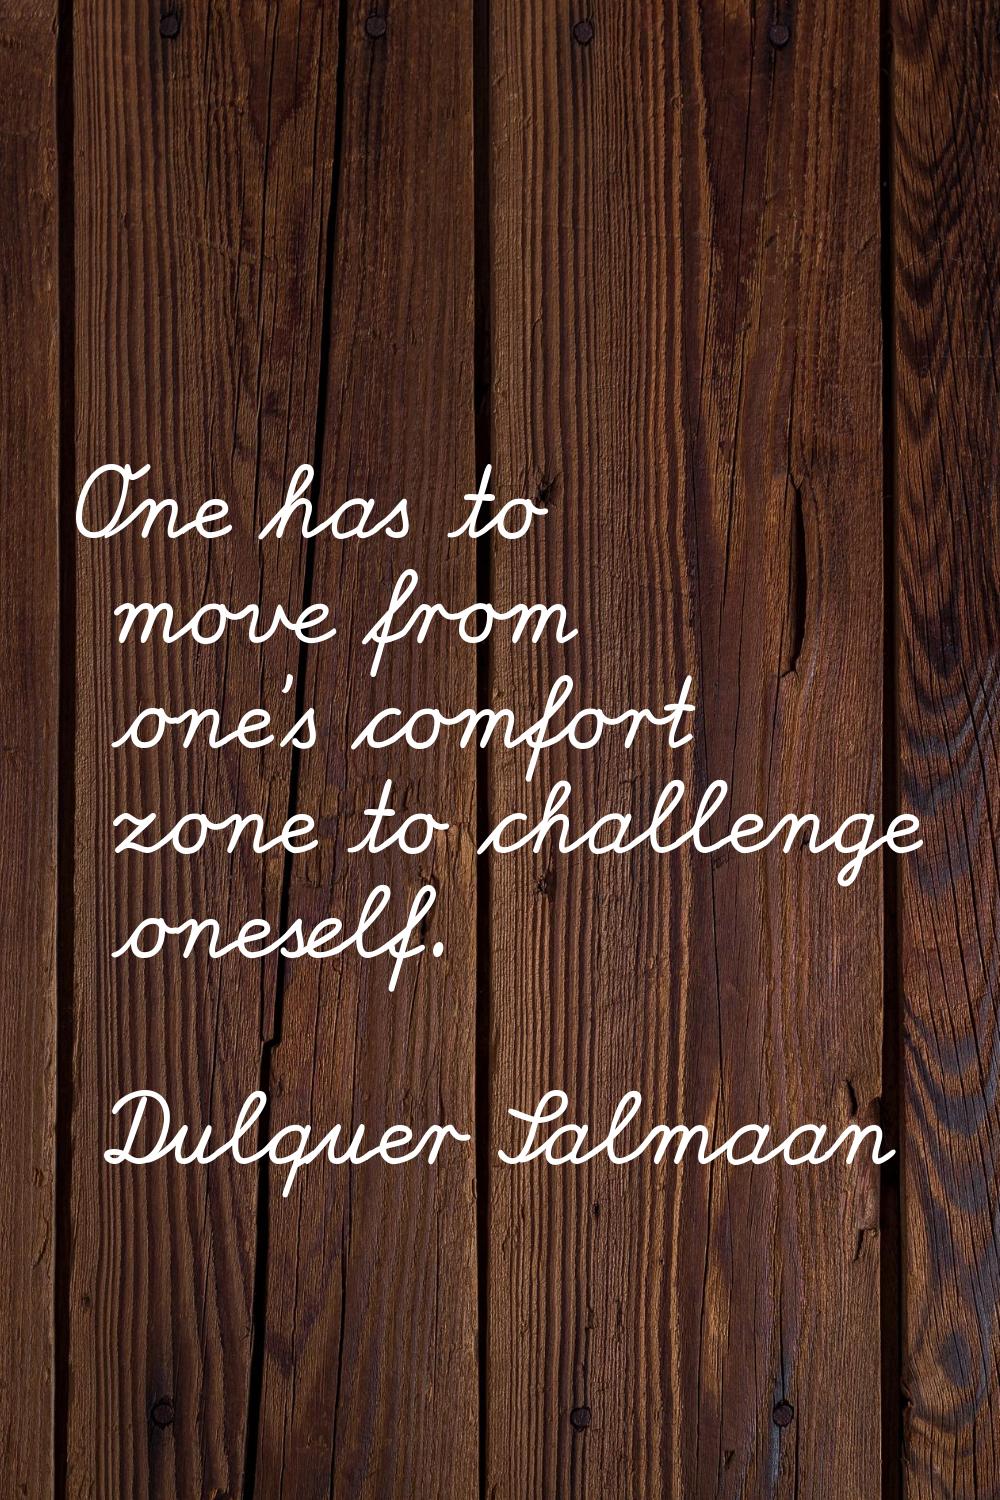 One has to move from one's comfort zone to challenge oneself.